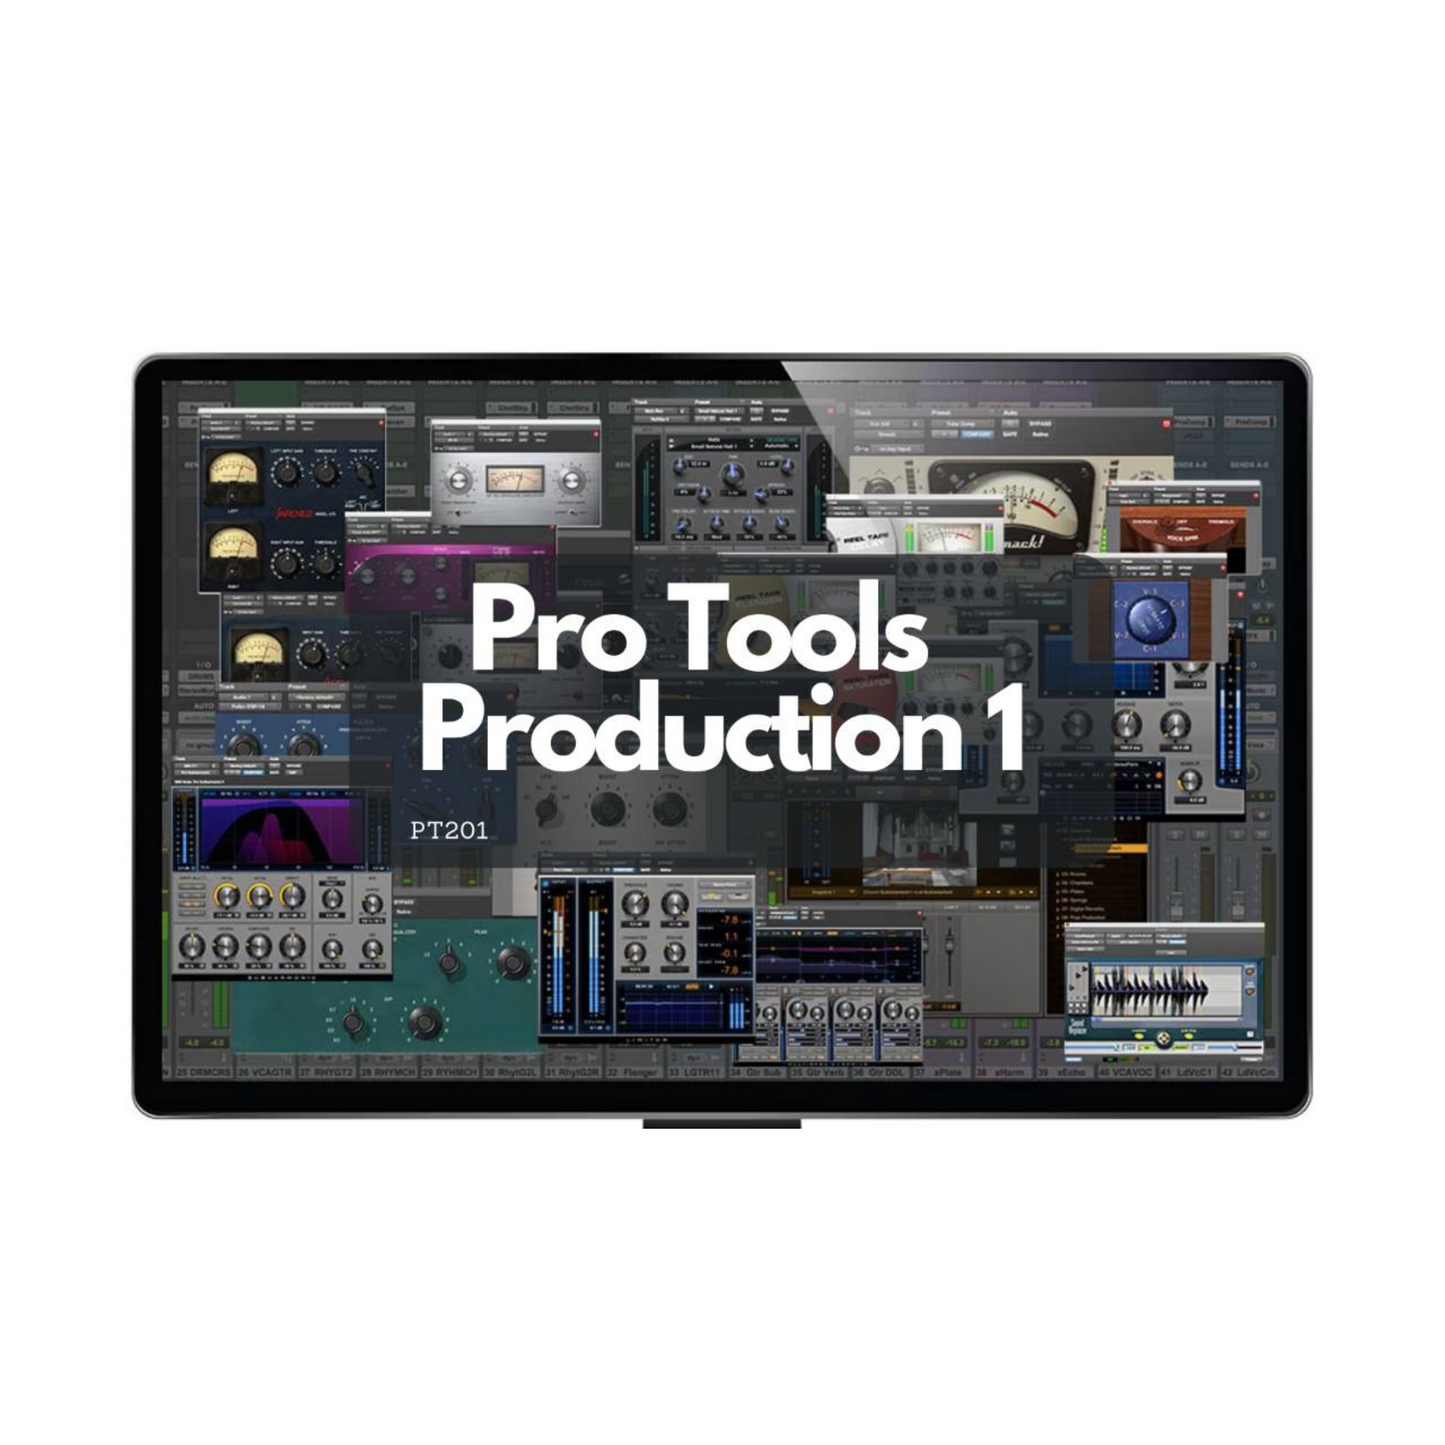 Avid Pro Tools Operator Certification Course Taught by Wavy Wayne